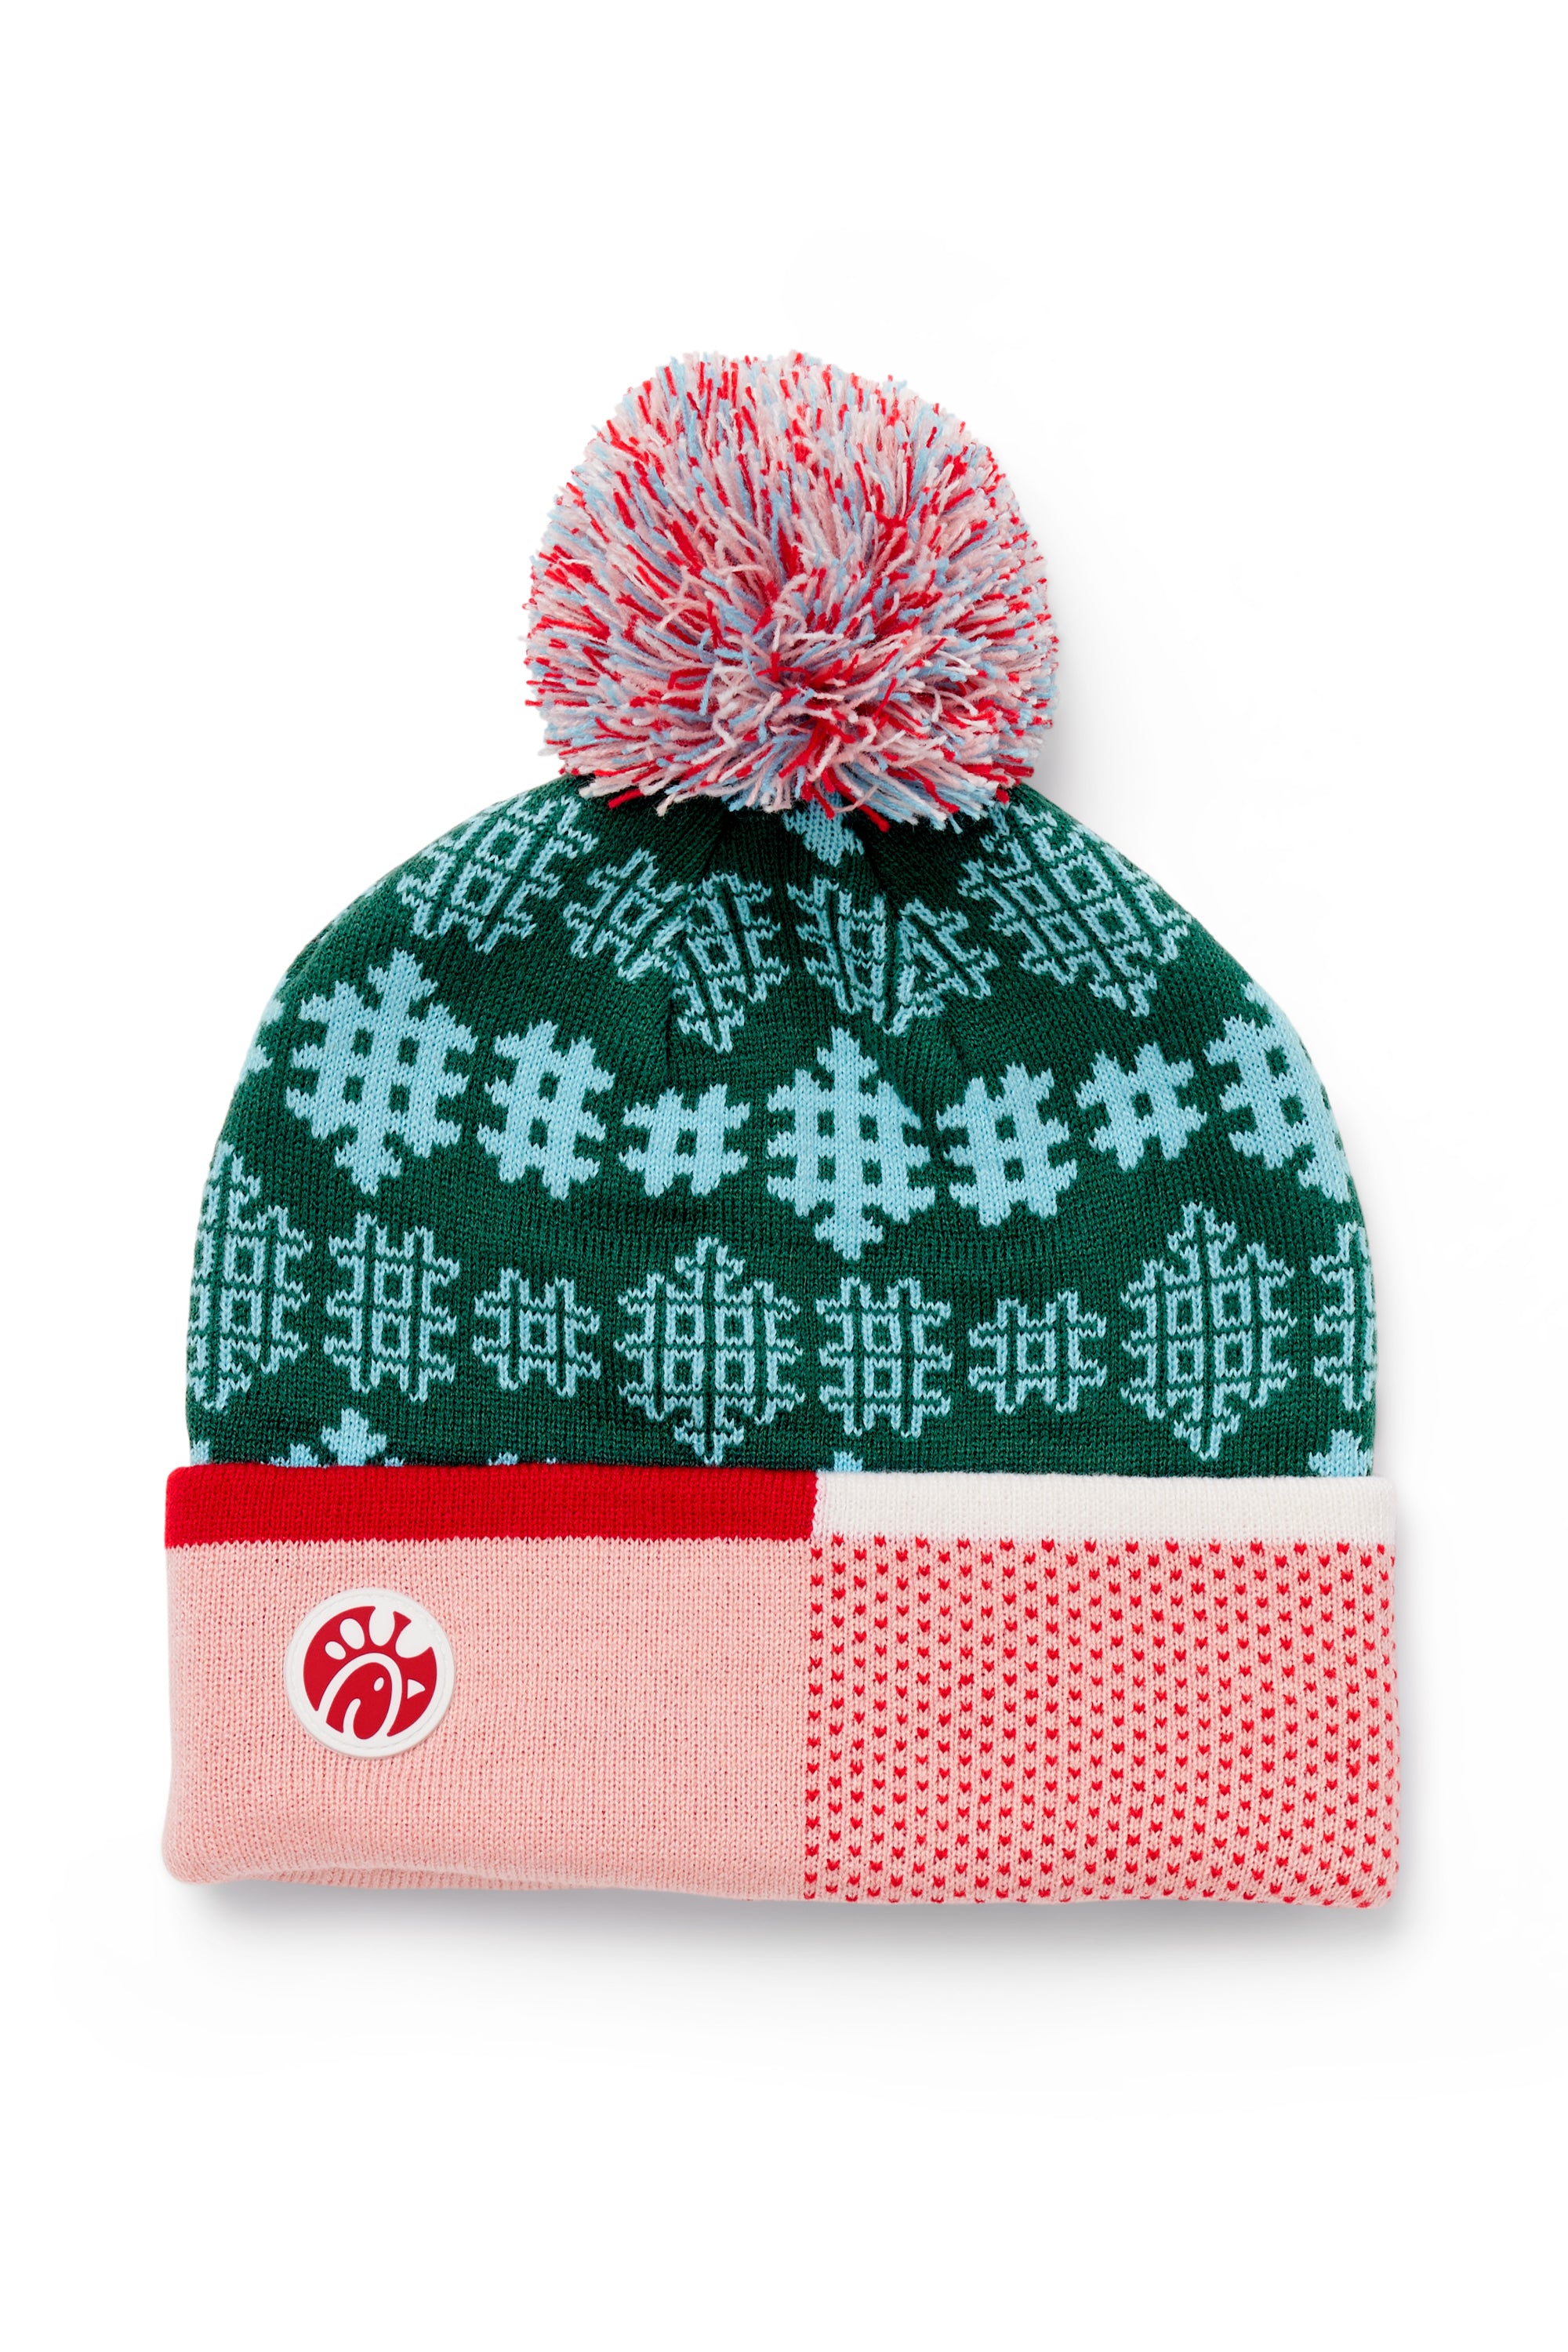 Festive Fun Pom Beanie with waffle fry snowflake pattern and silicone Chick-fil-A logo on cuff